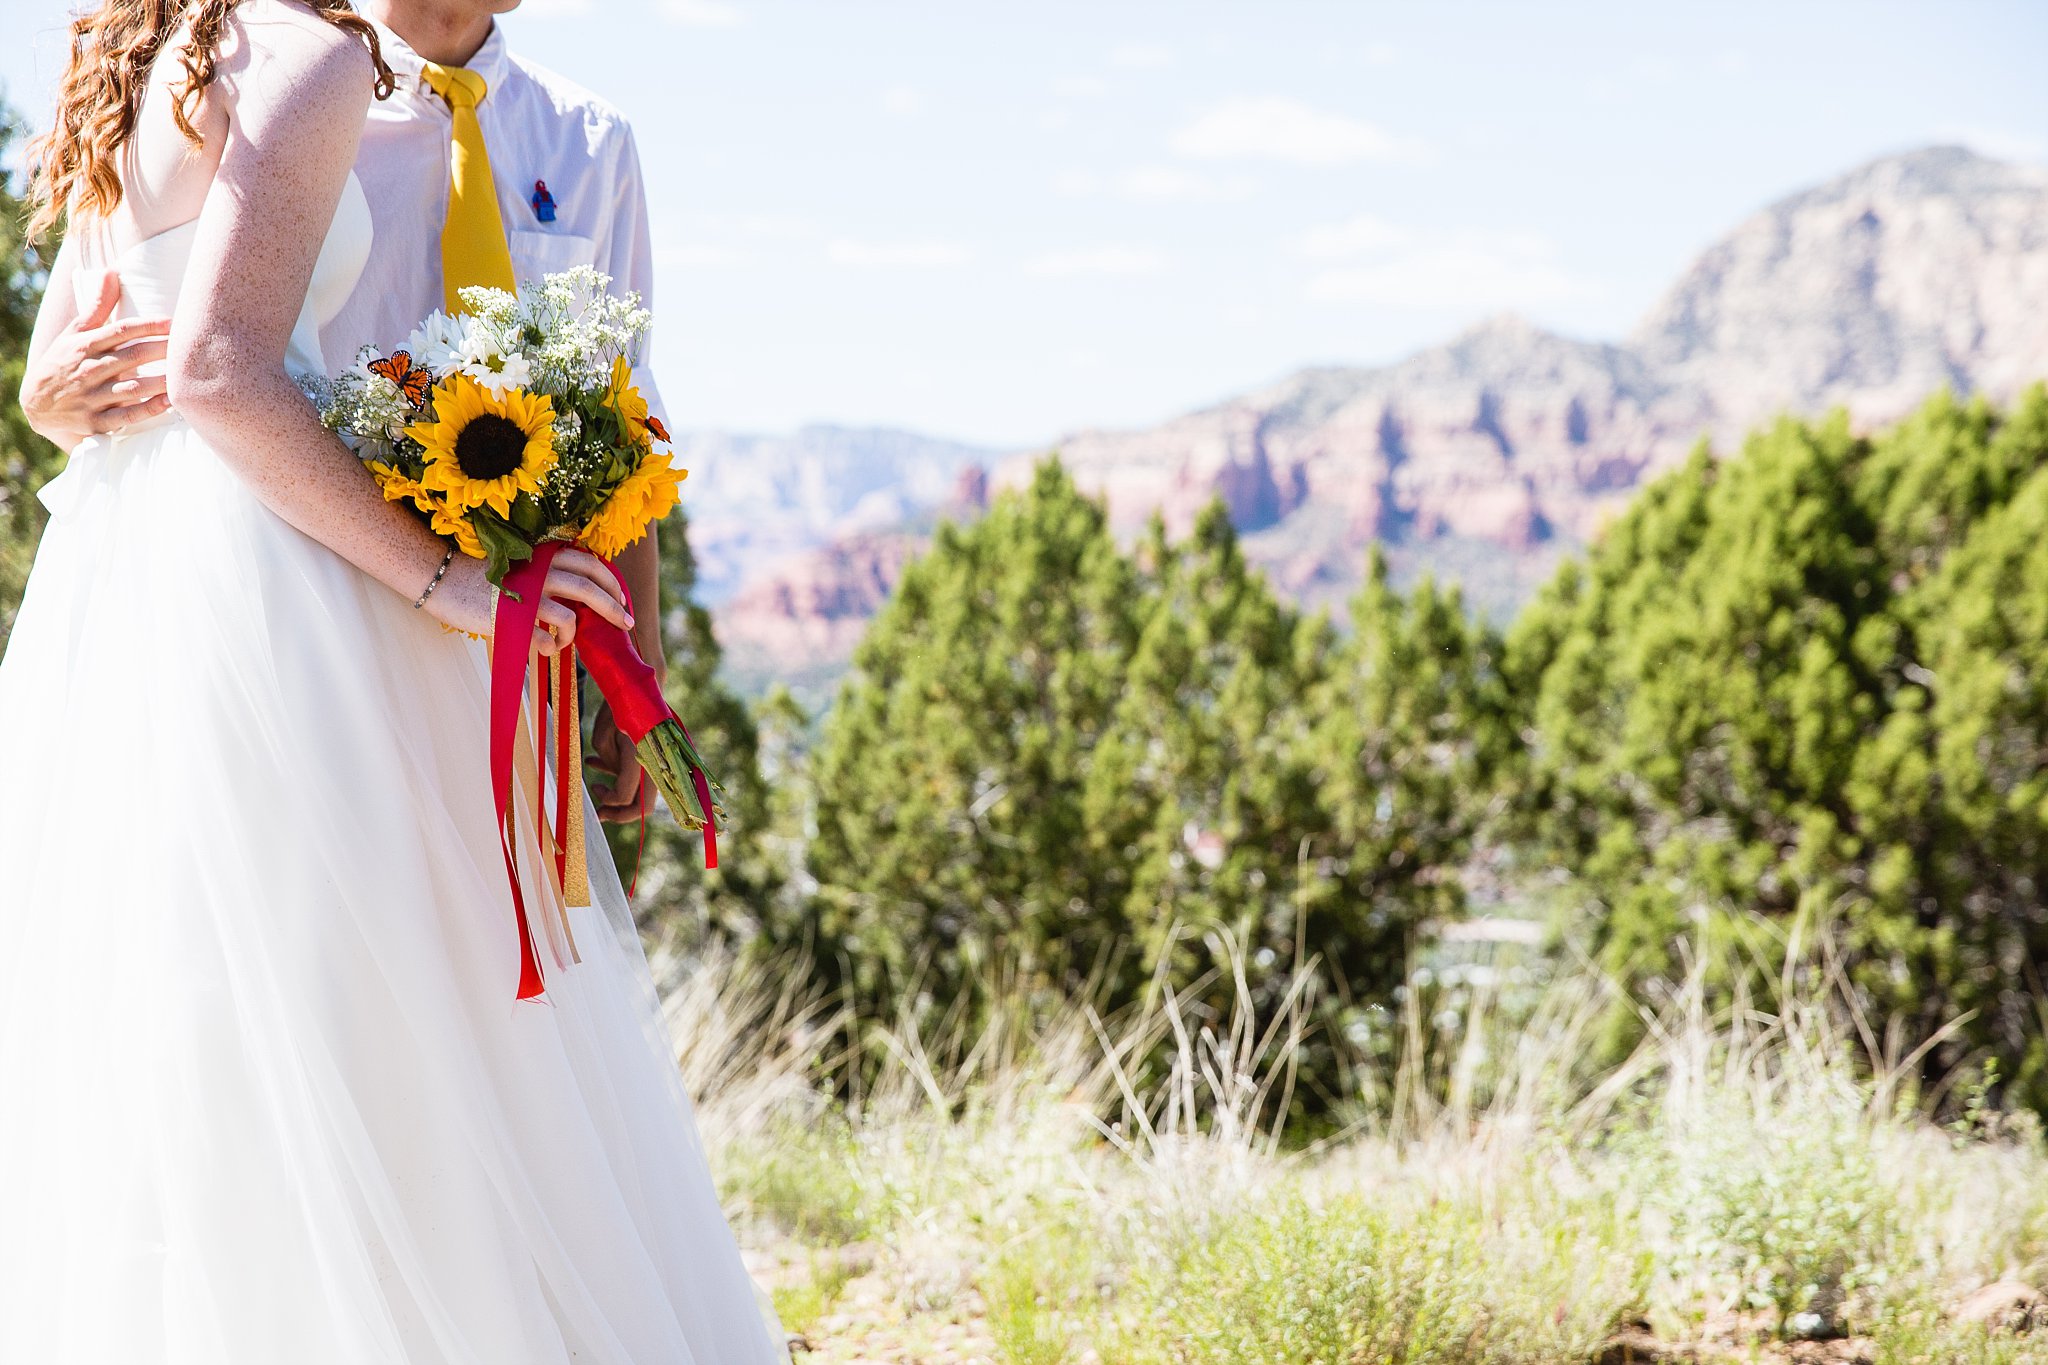 Bride and groom wedding day outfit details by Sedona wedding photographer PMA Photography.